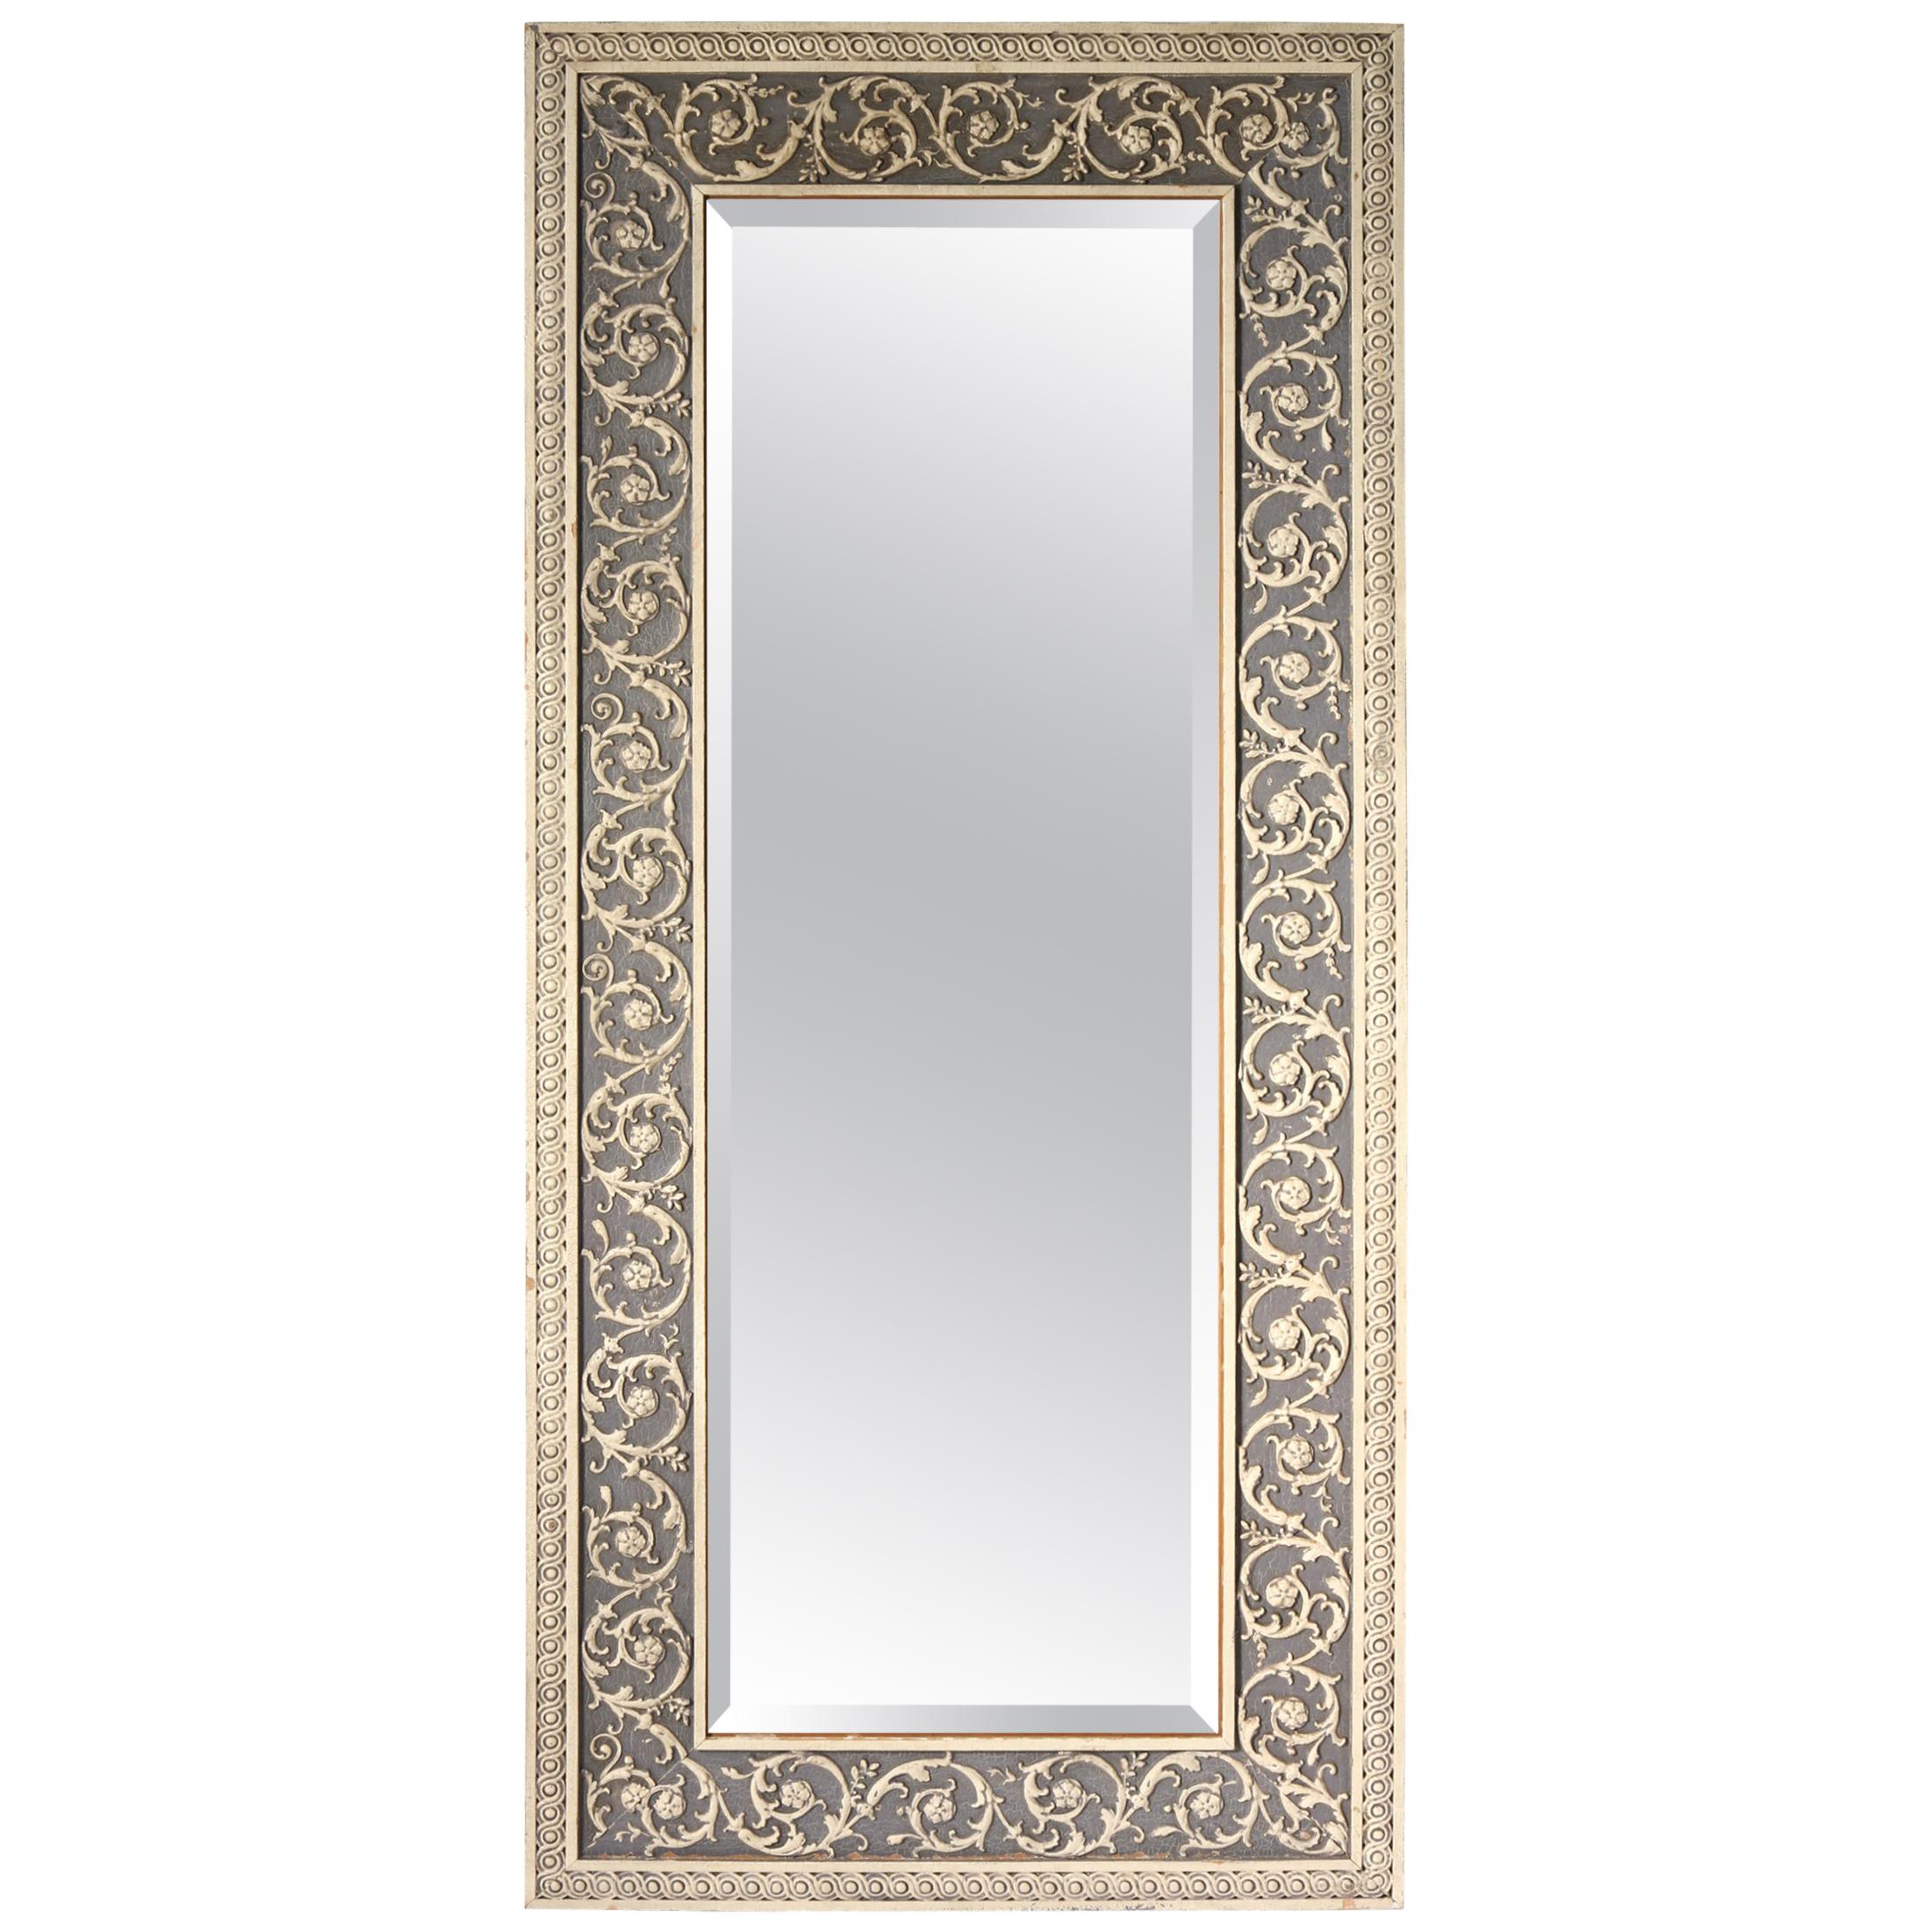 20th Century Wood Framed Wall Hanging Mirror